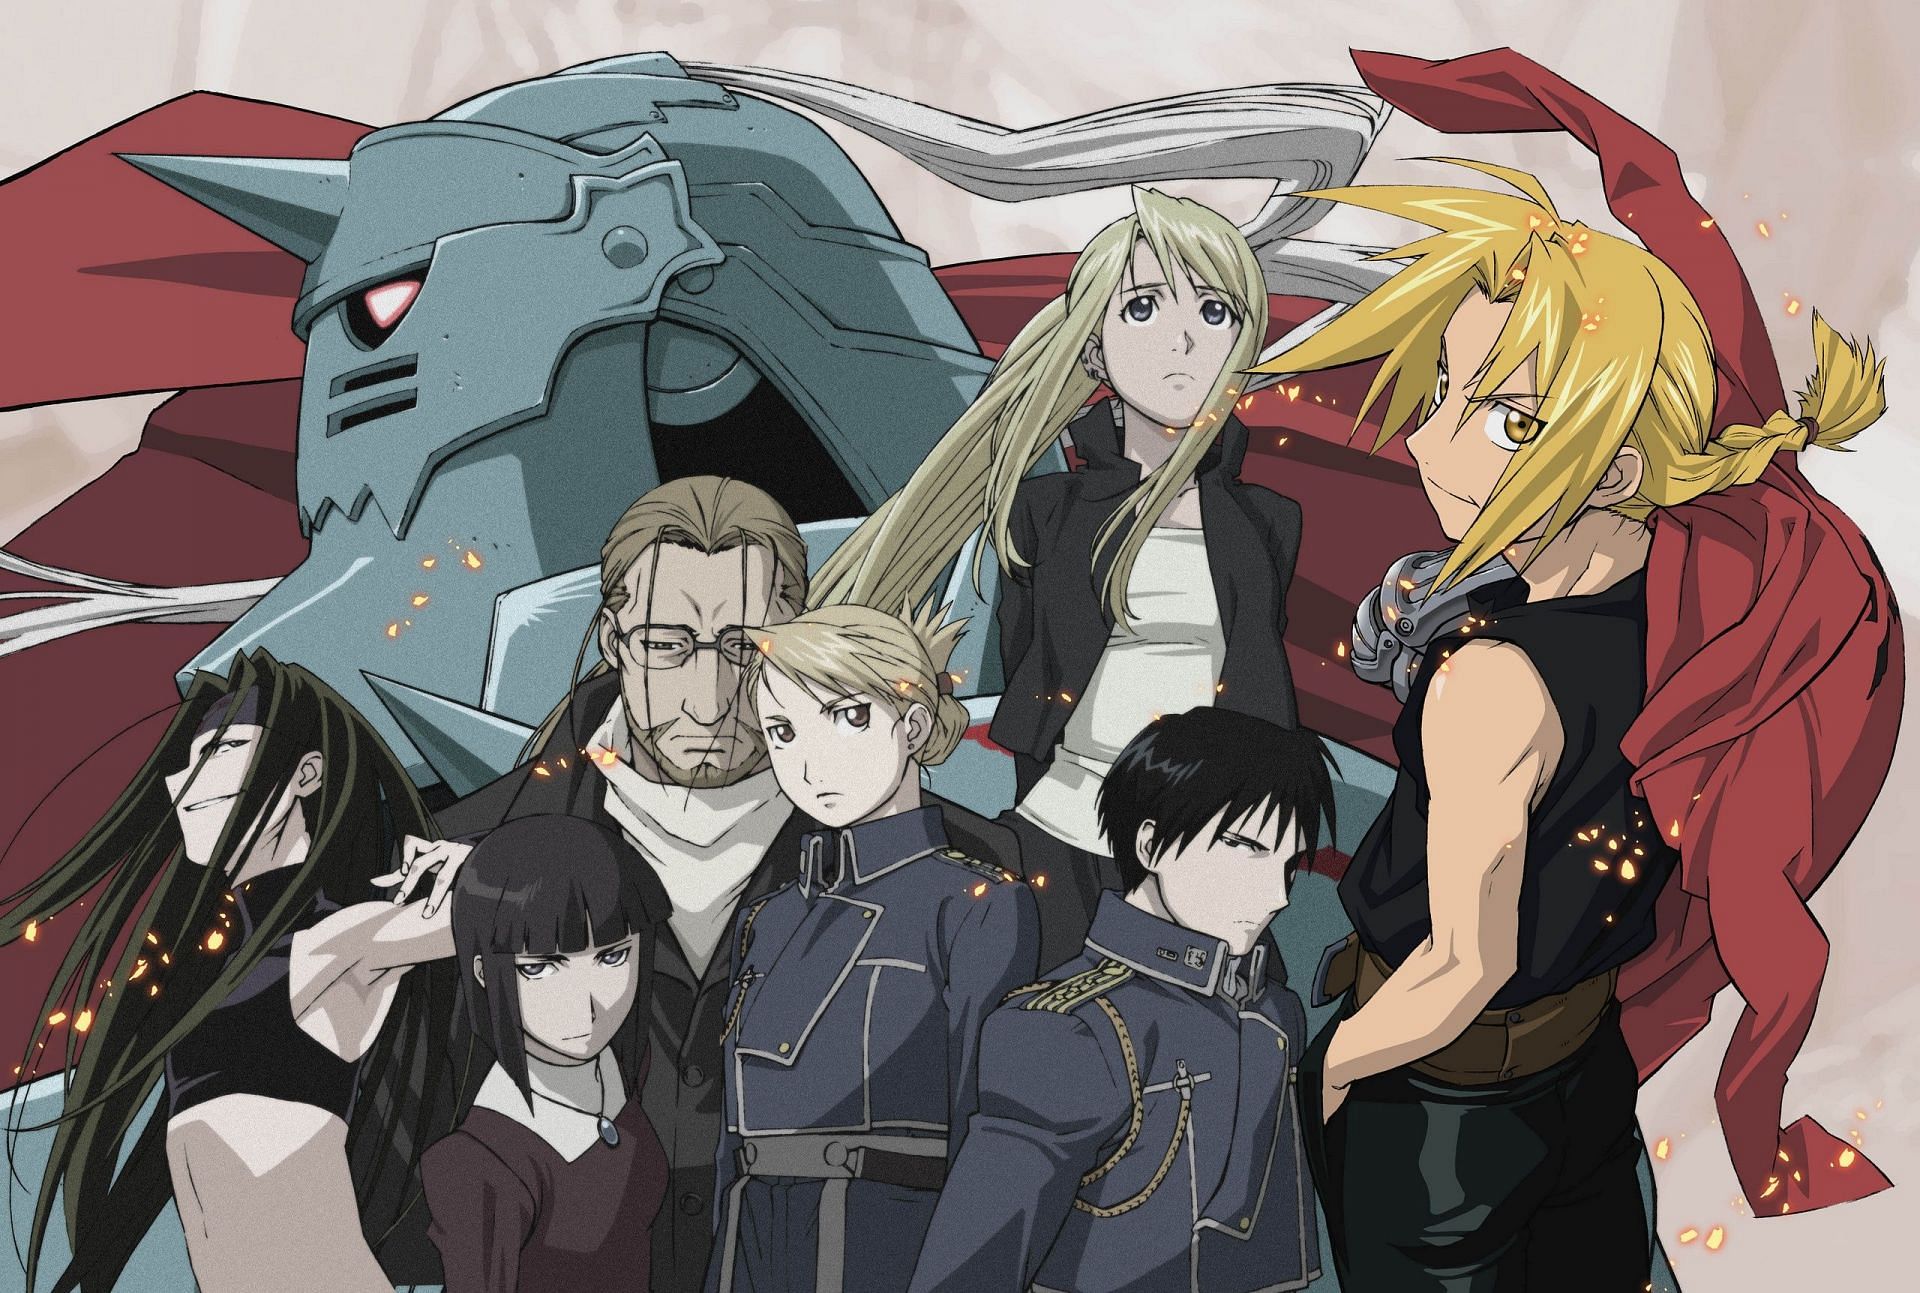 The main cast of Fullmetal alchemist, featuring Ed (right, blonde hair) and Al (top left, armored helmet), the two main protagonists of the story (Image via Google)